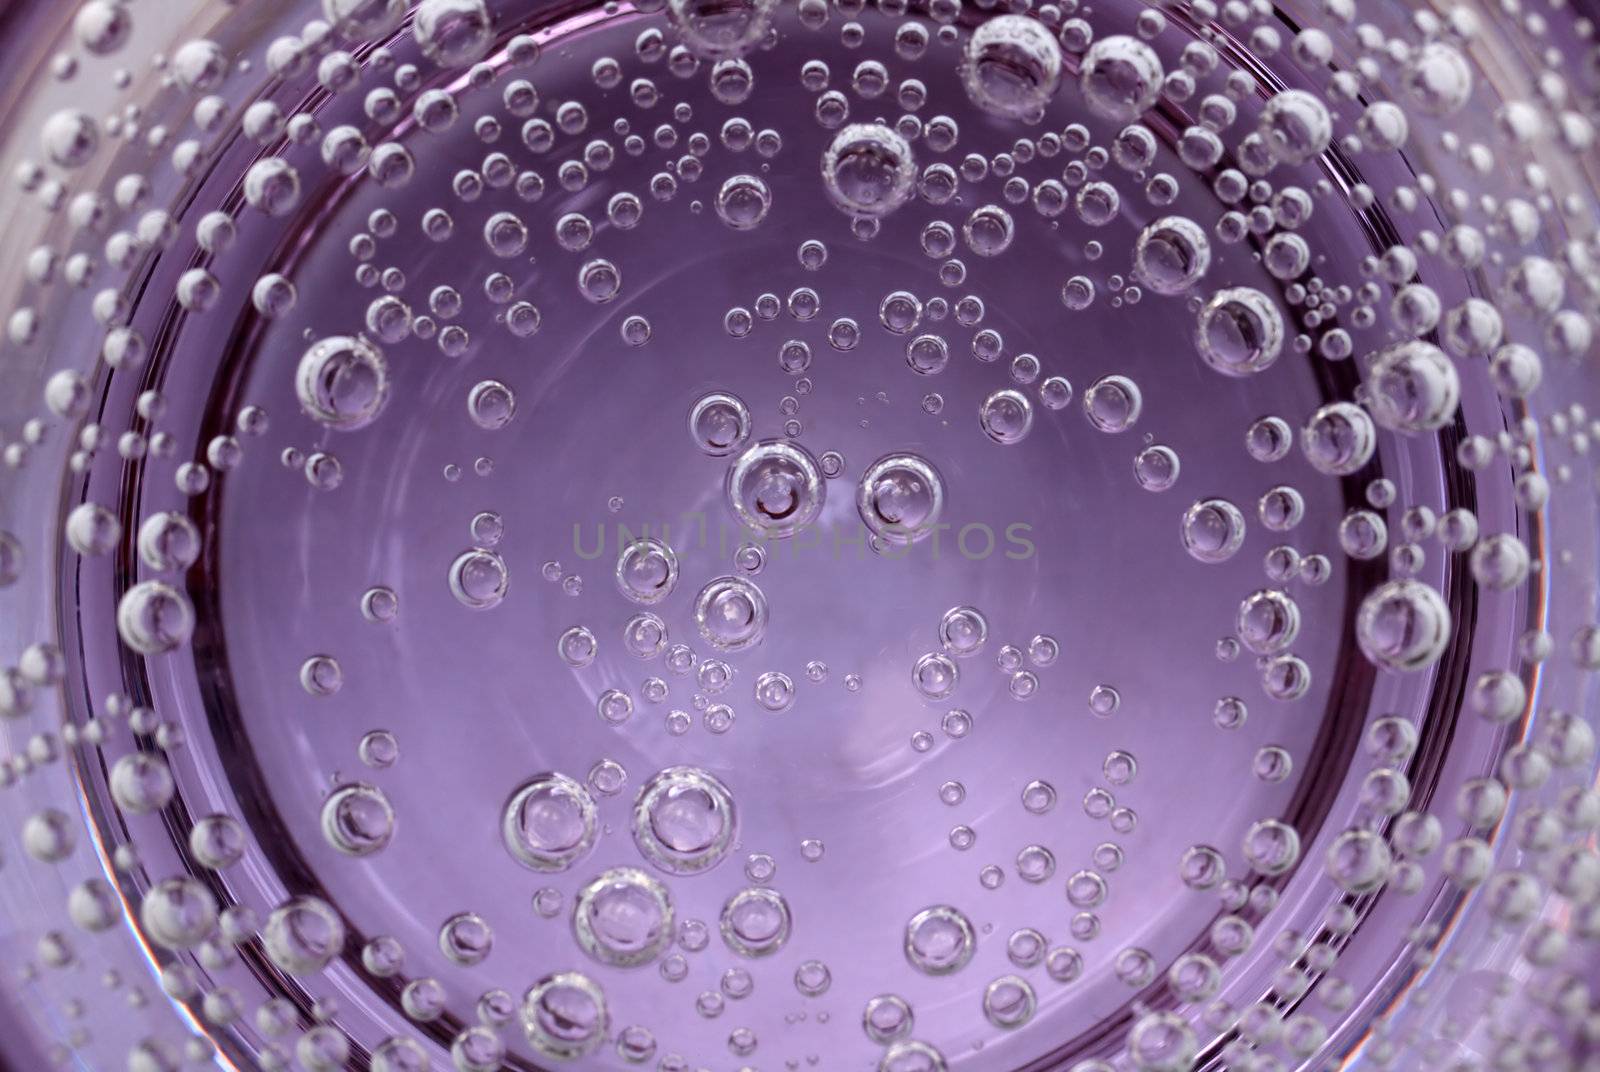 air bubbles in water - good for background